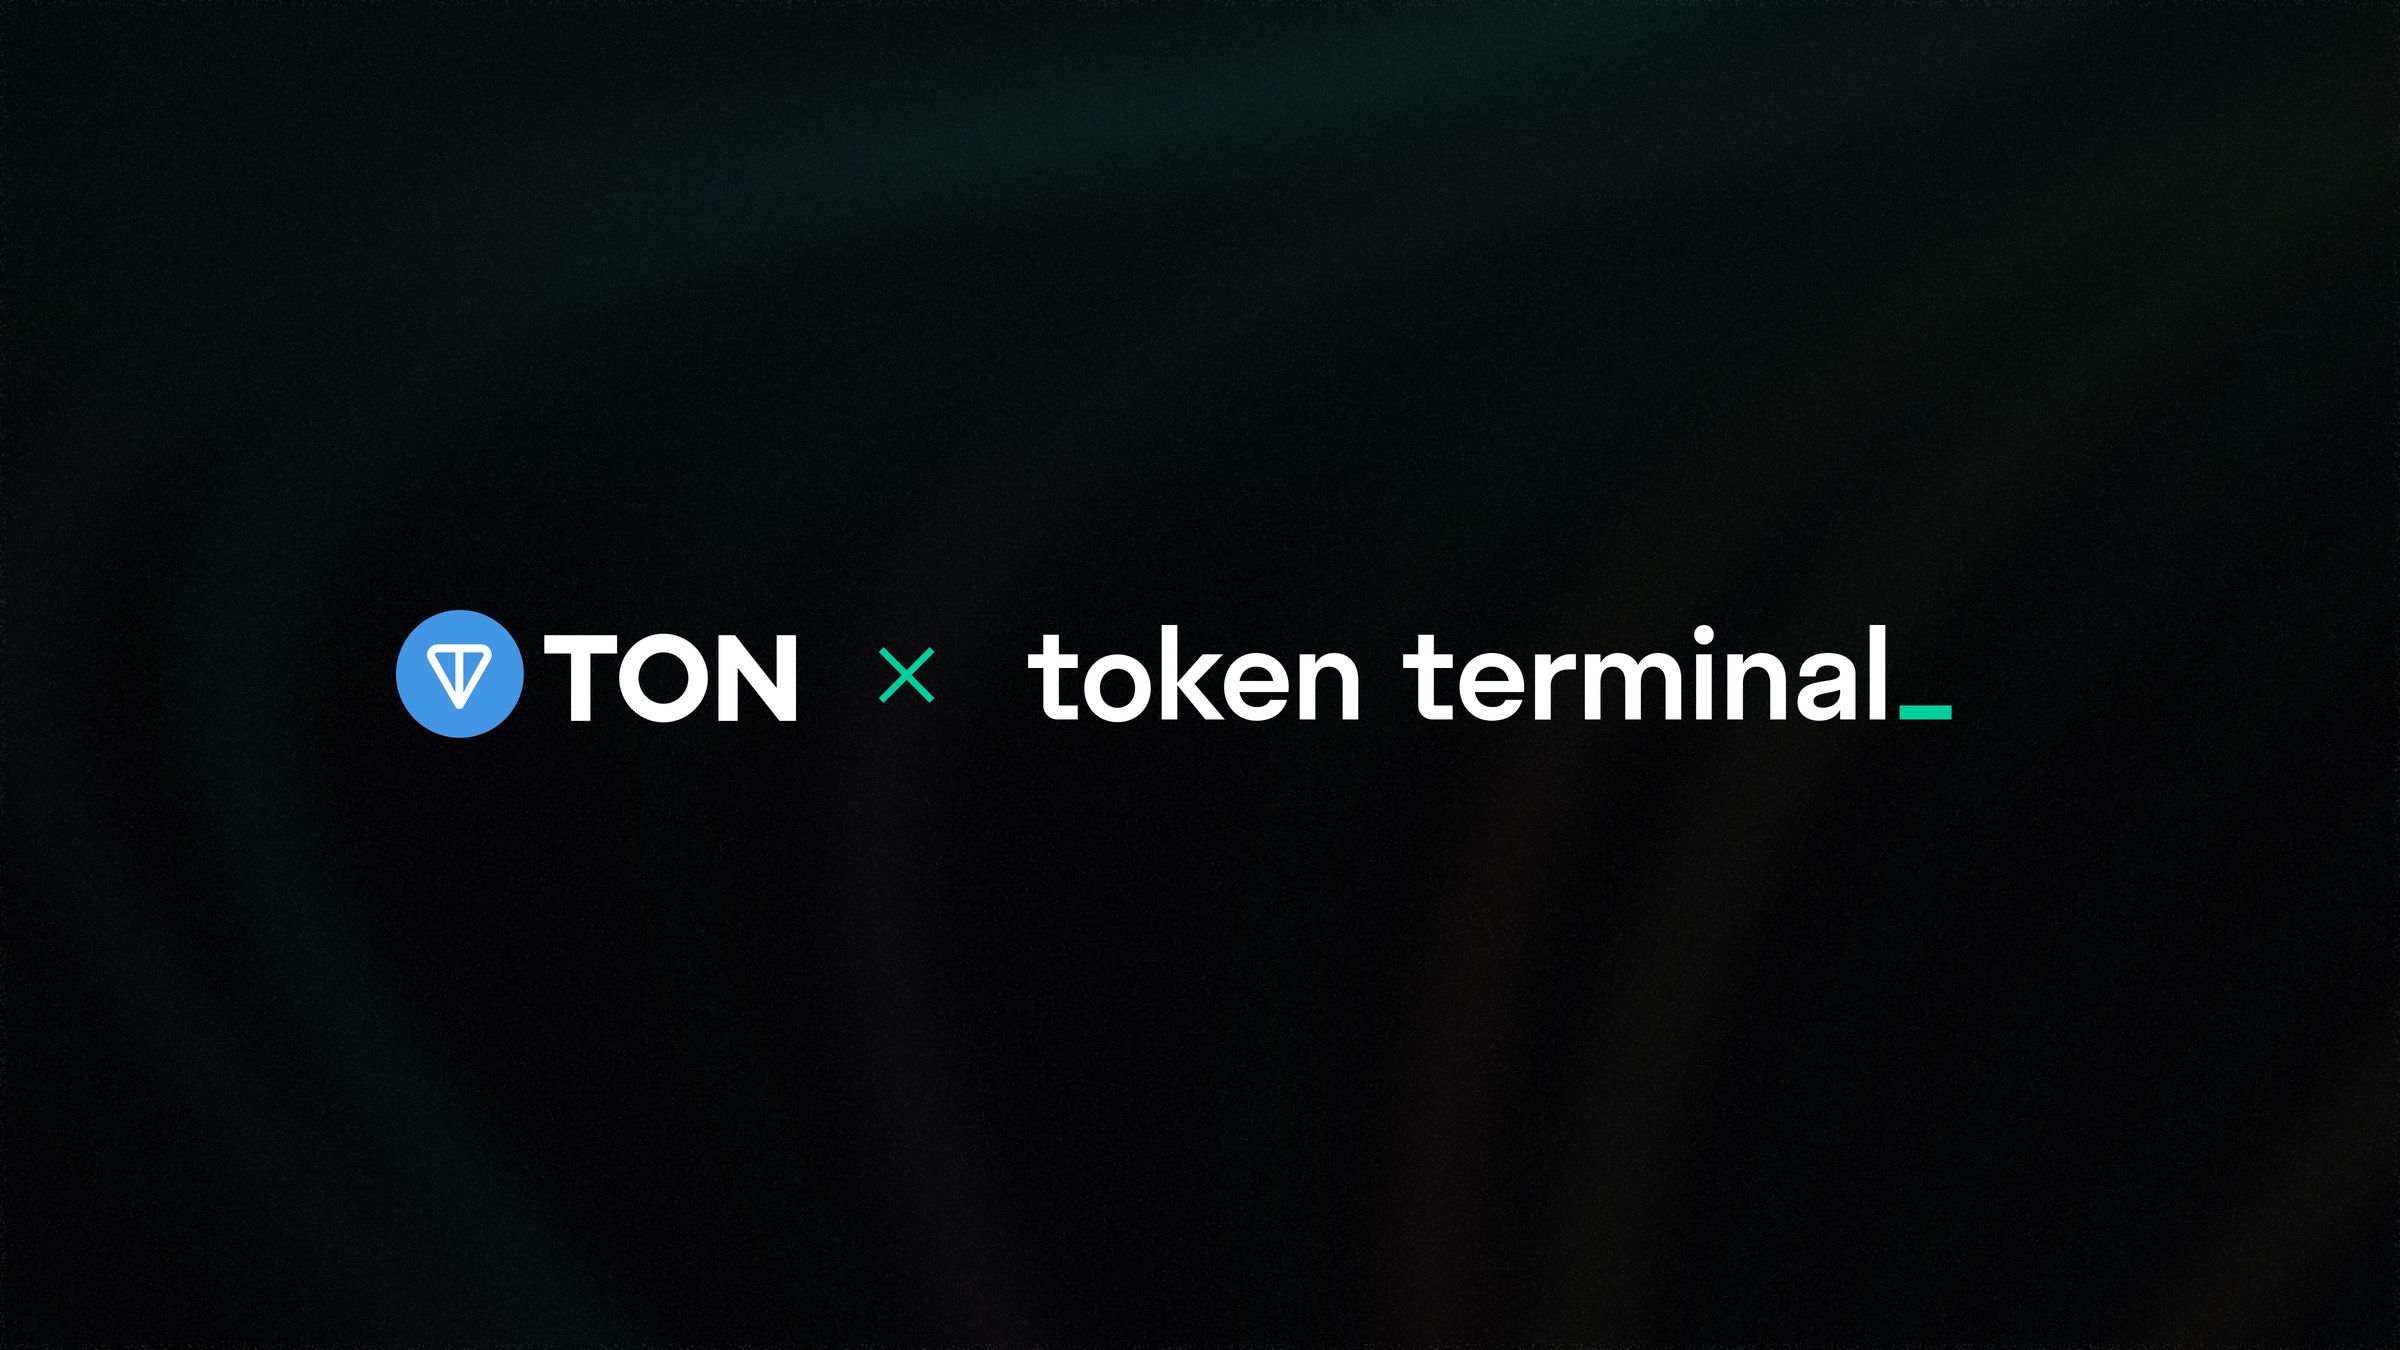 Token Terminal brings TON’s onchain data in front of 300,000 institutional customers